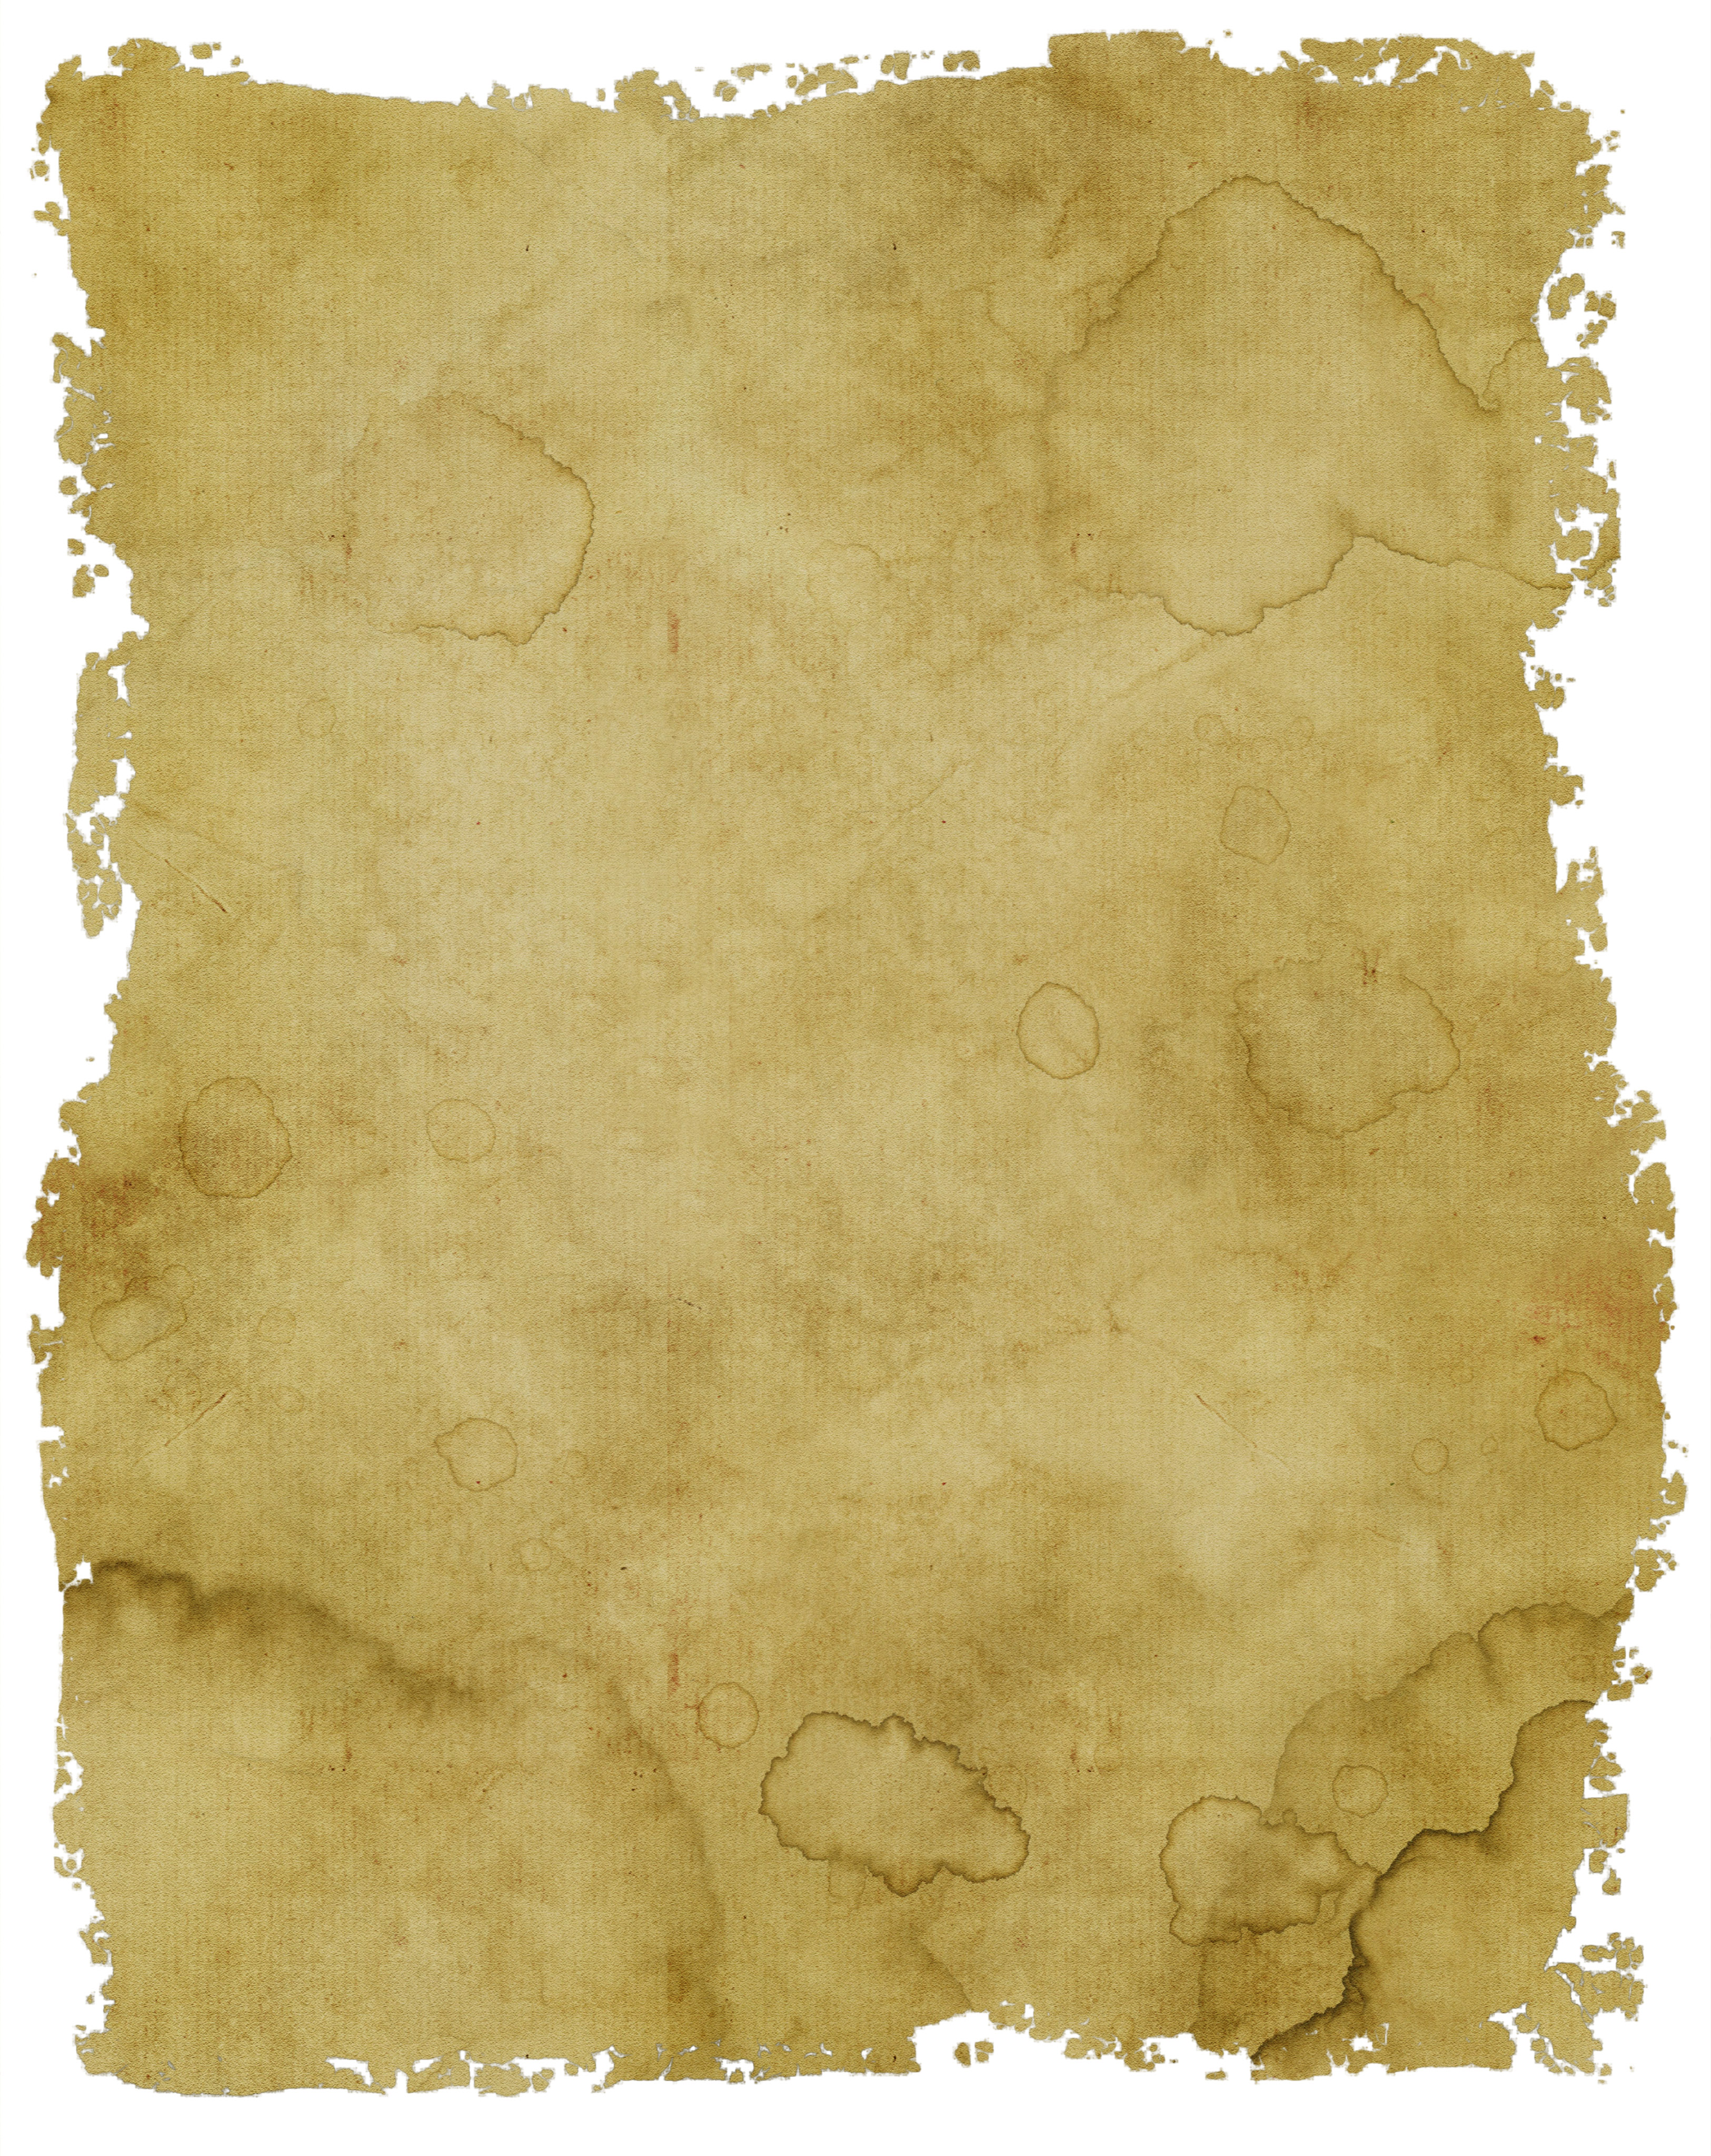 Another rough old paper background texture with torn and ...